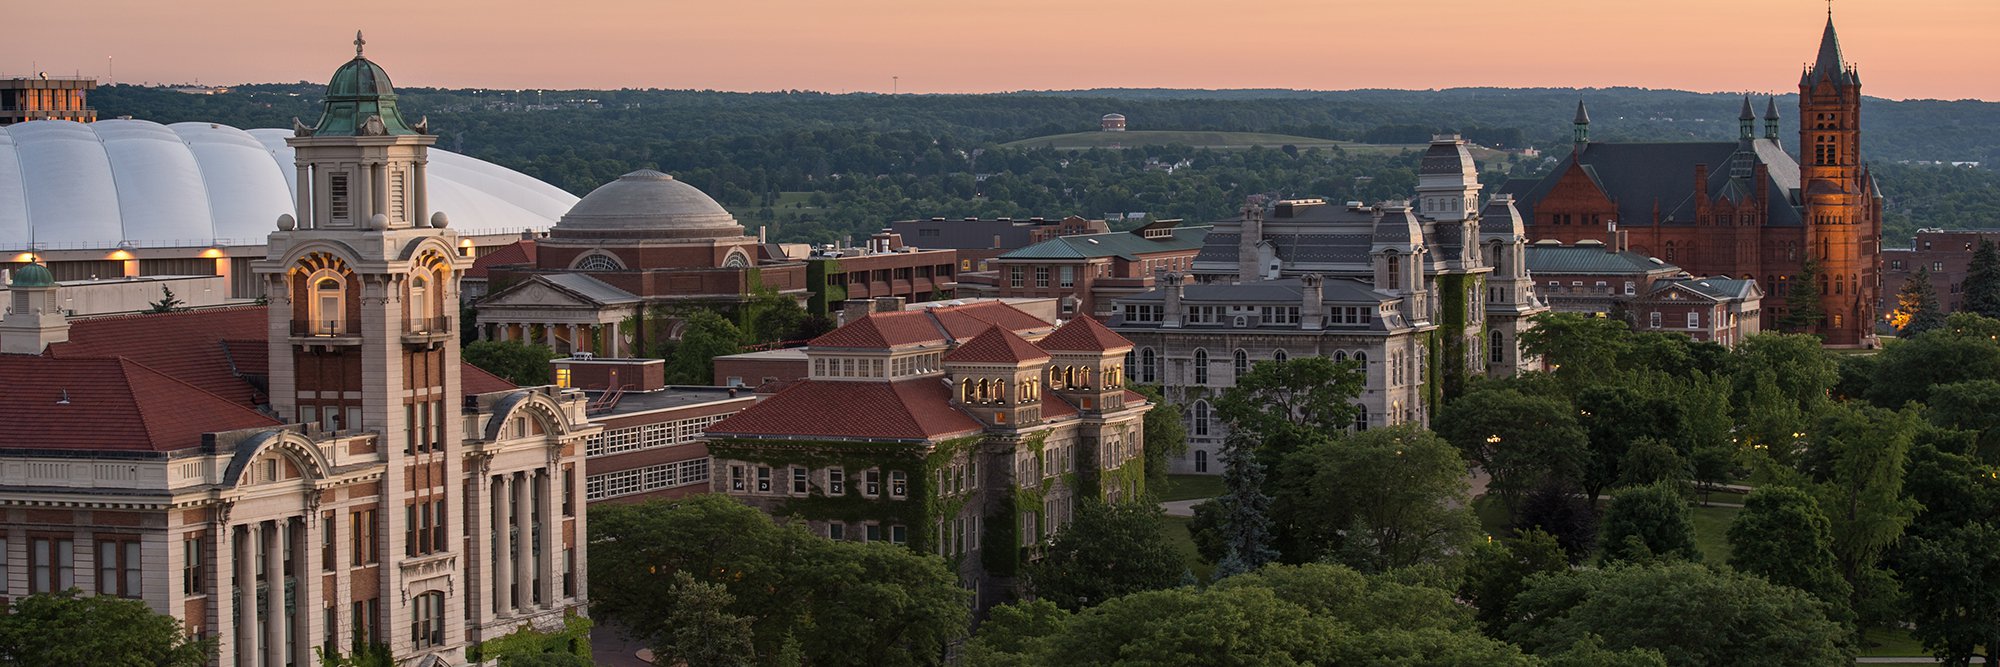 tower row at sunset on the syracuse university campus